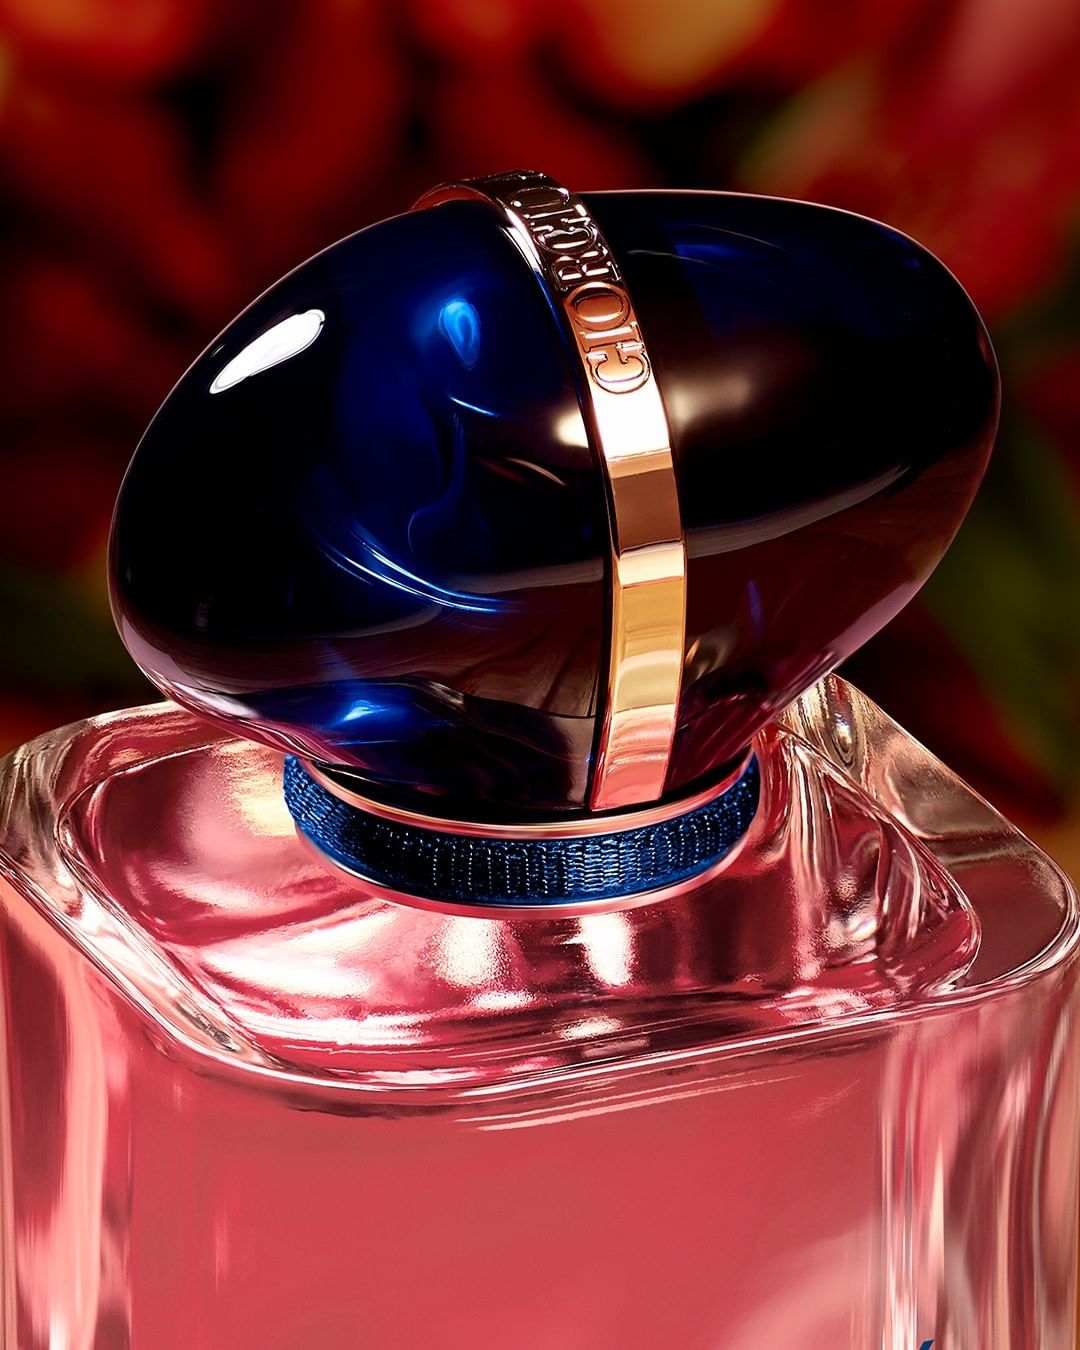 Armani beauty - A mesmerizing blue talisman. MY WAY's deep blue cap captures the lived experiences and meaningful encounters that inspired the fragrance. 

Available now online at Armanibeauty.com, an...